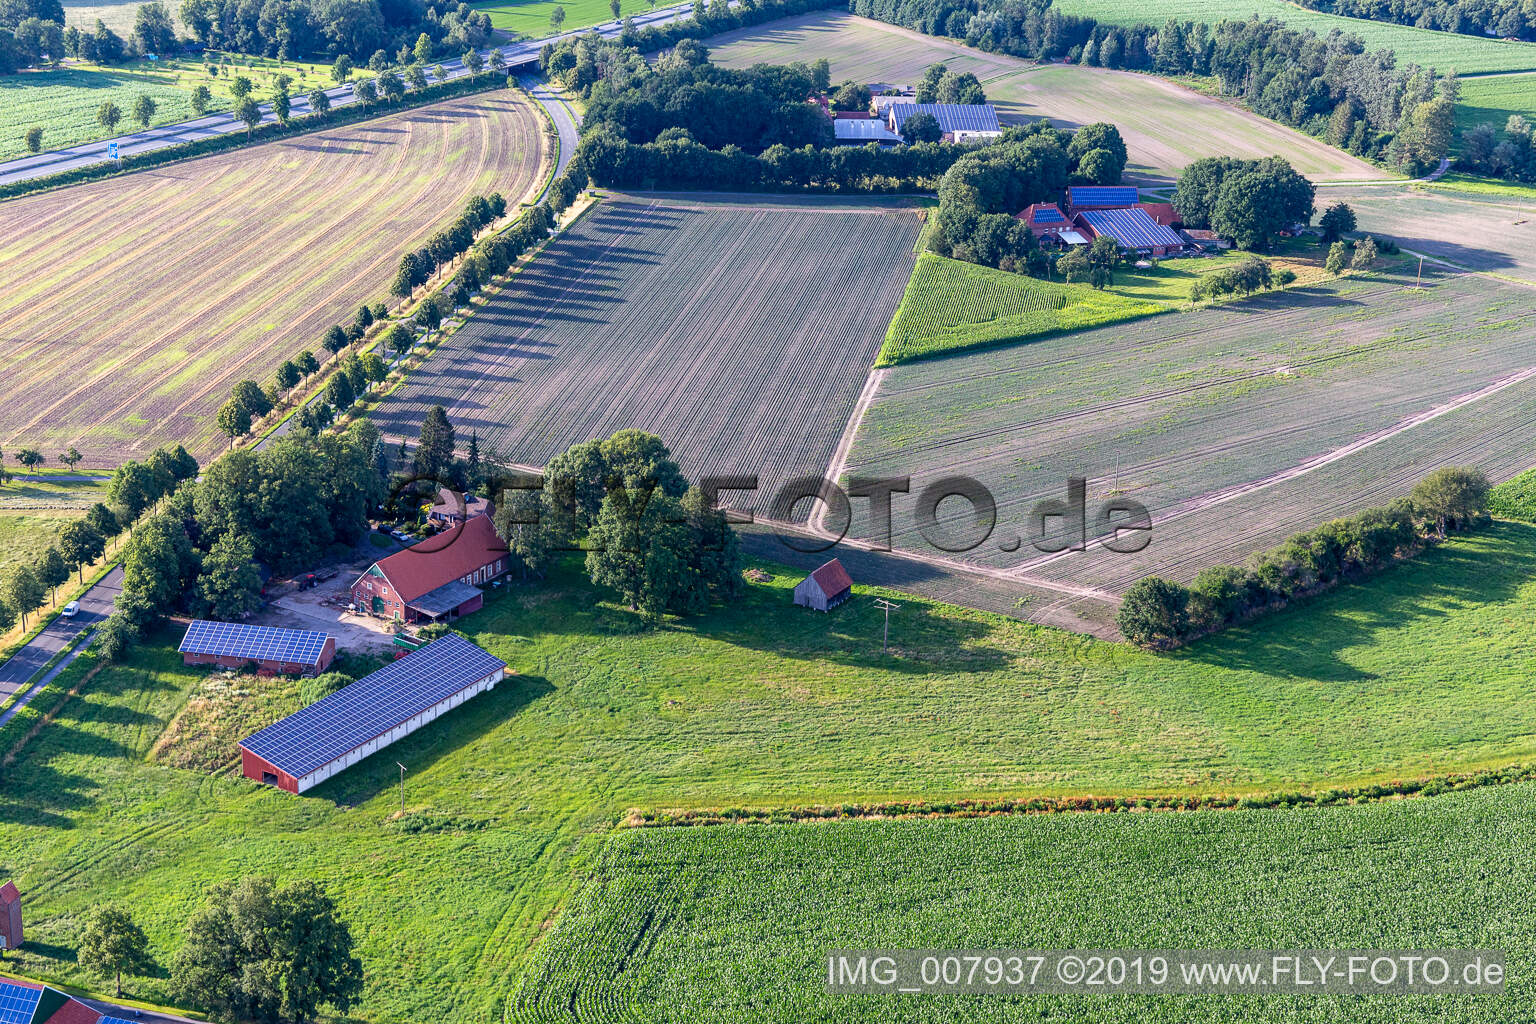 Gescher in the state North Rhine-Westphalia, Germany from the drone perspective